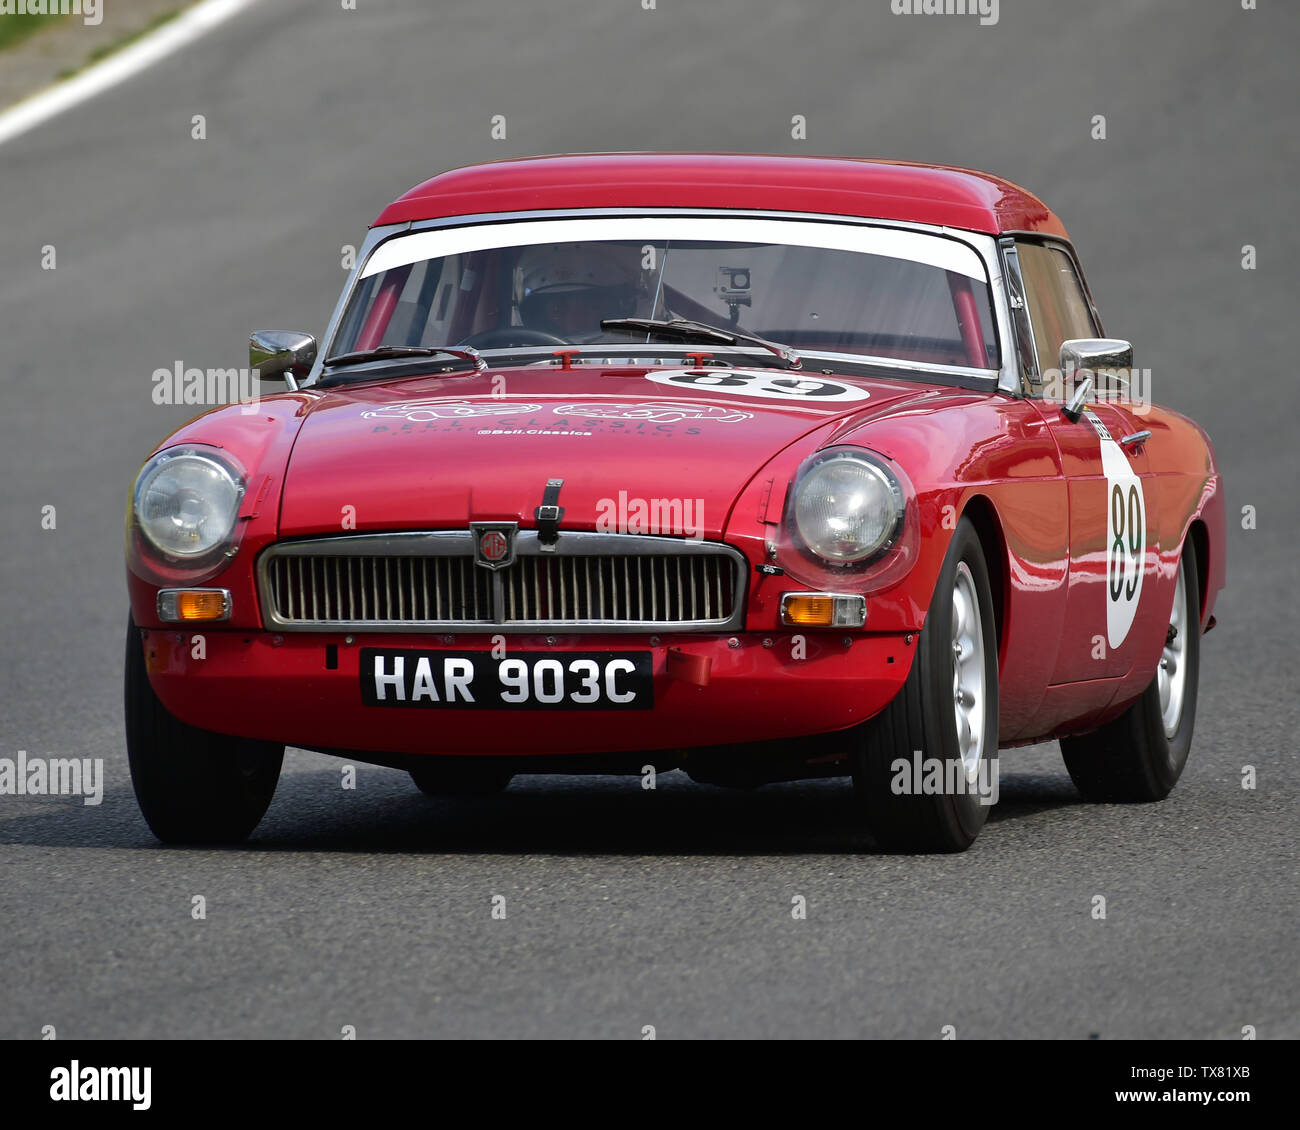 Simon Barker, MGB, Equipe GTS, Masters Historic Festival, Brands Hatch, May 2019. Brands Hatch, classic cars, classic event, Classic Racing Cars, FIA, Stock Photo